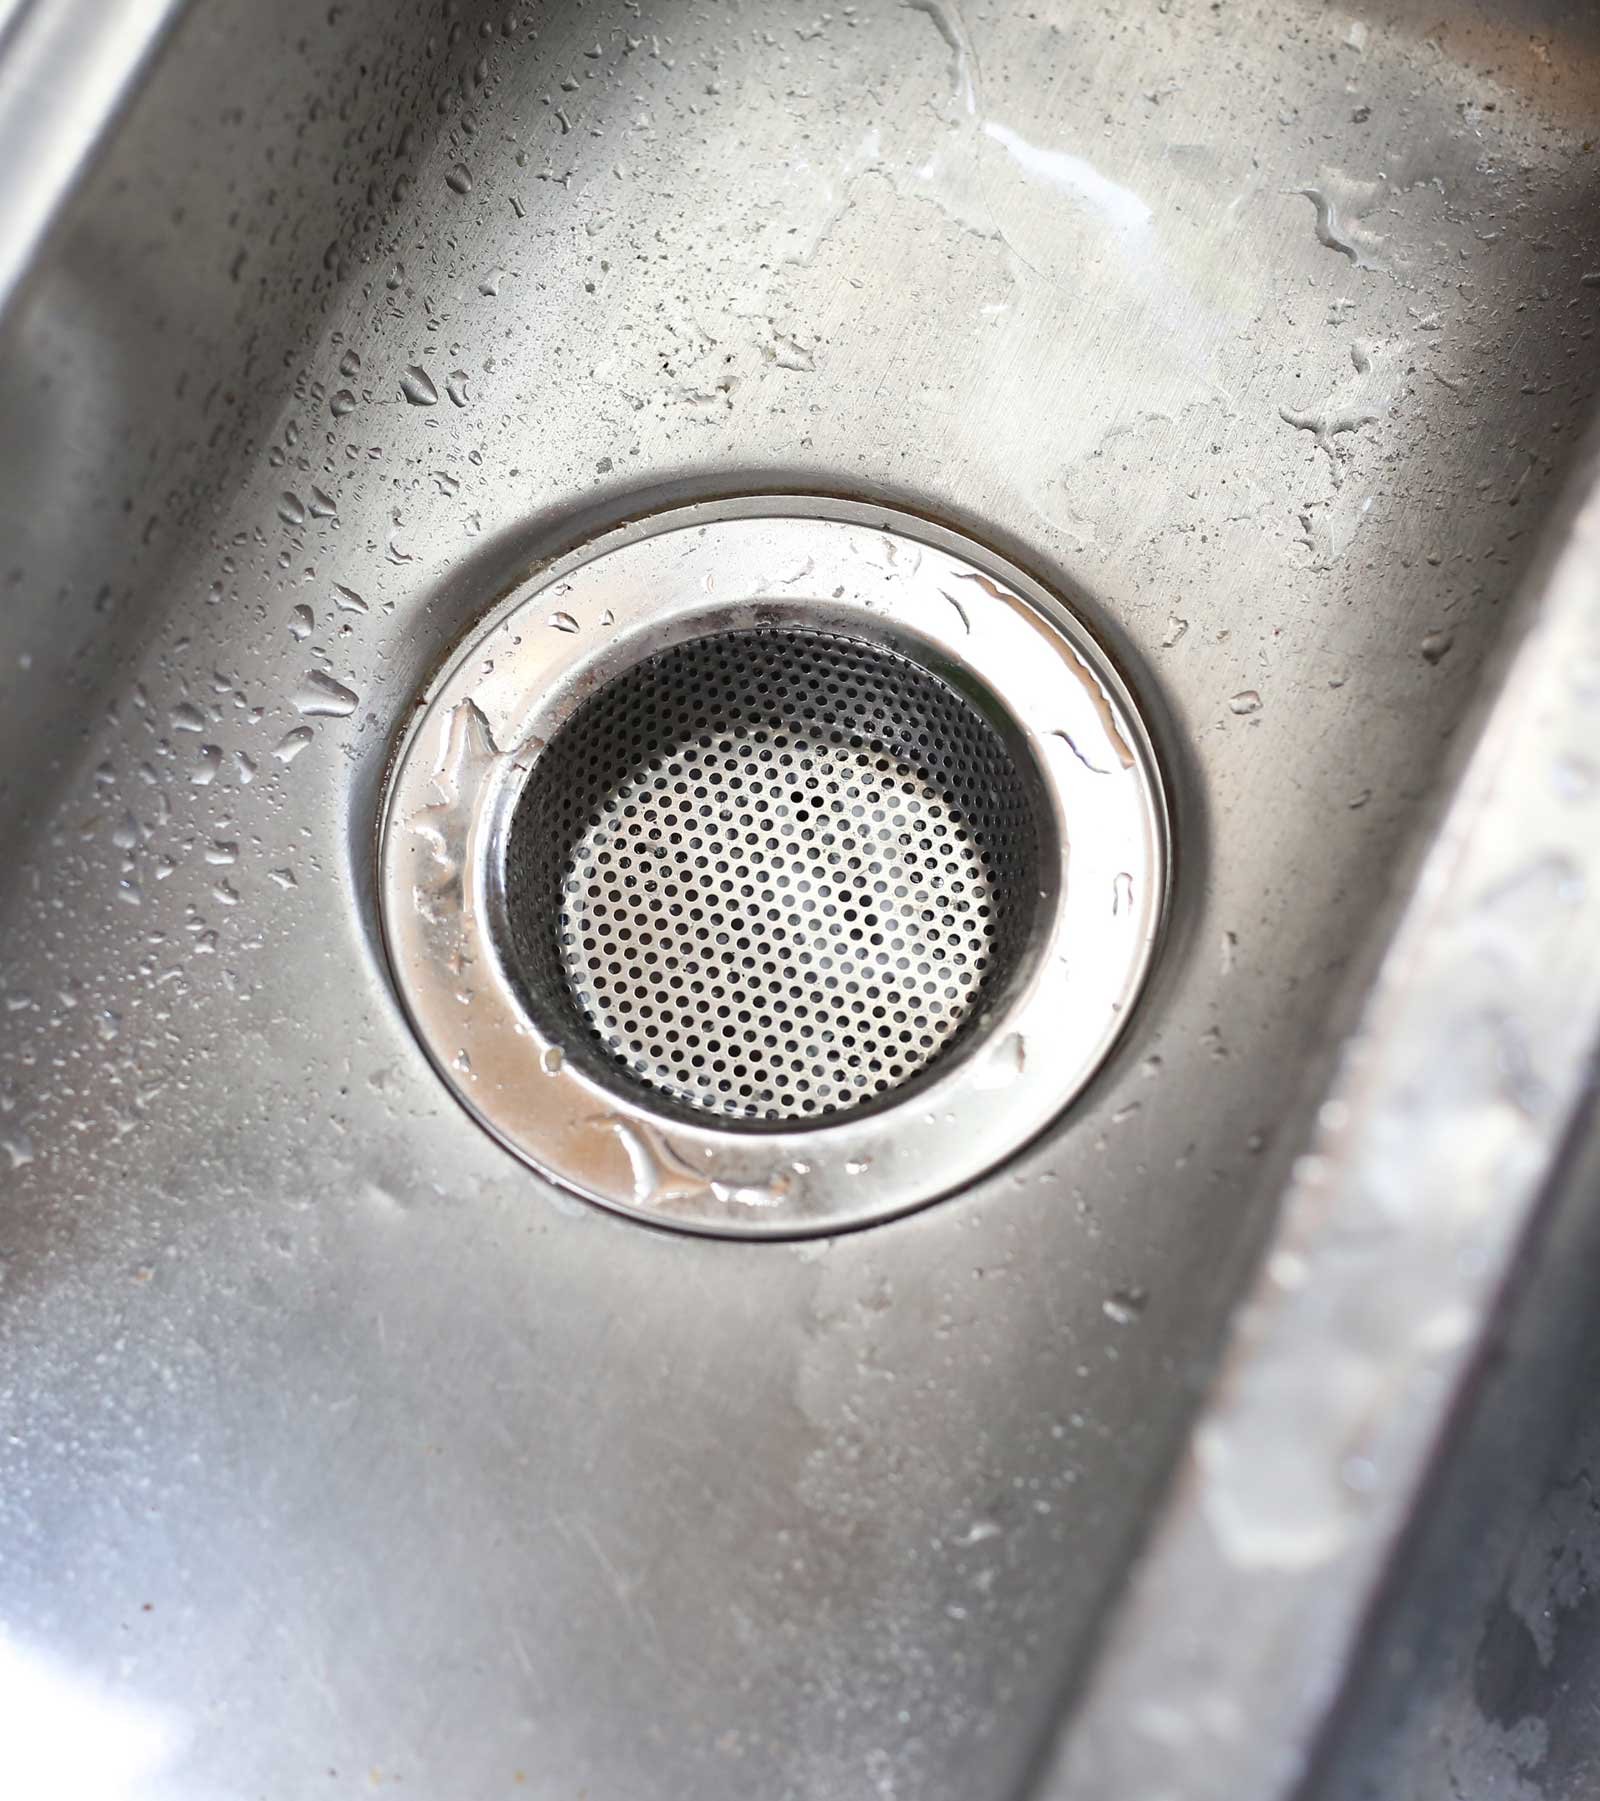 Cleaned and Working Sink Drain